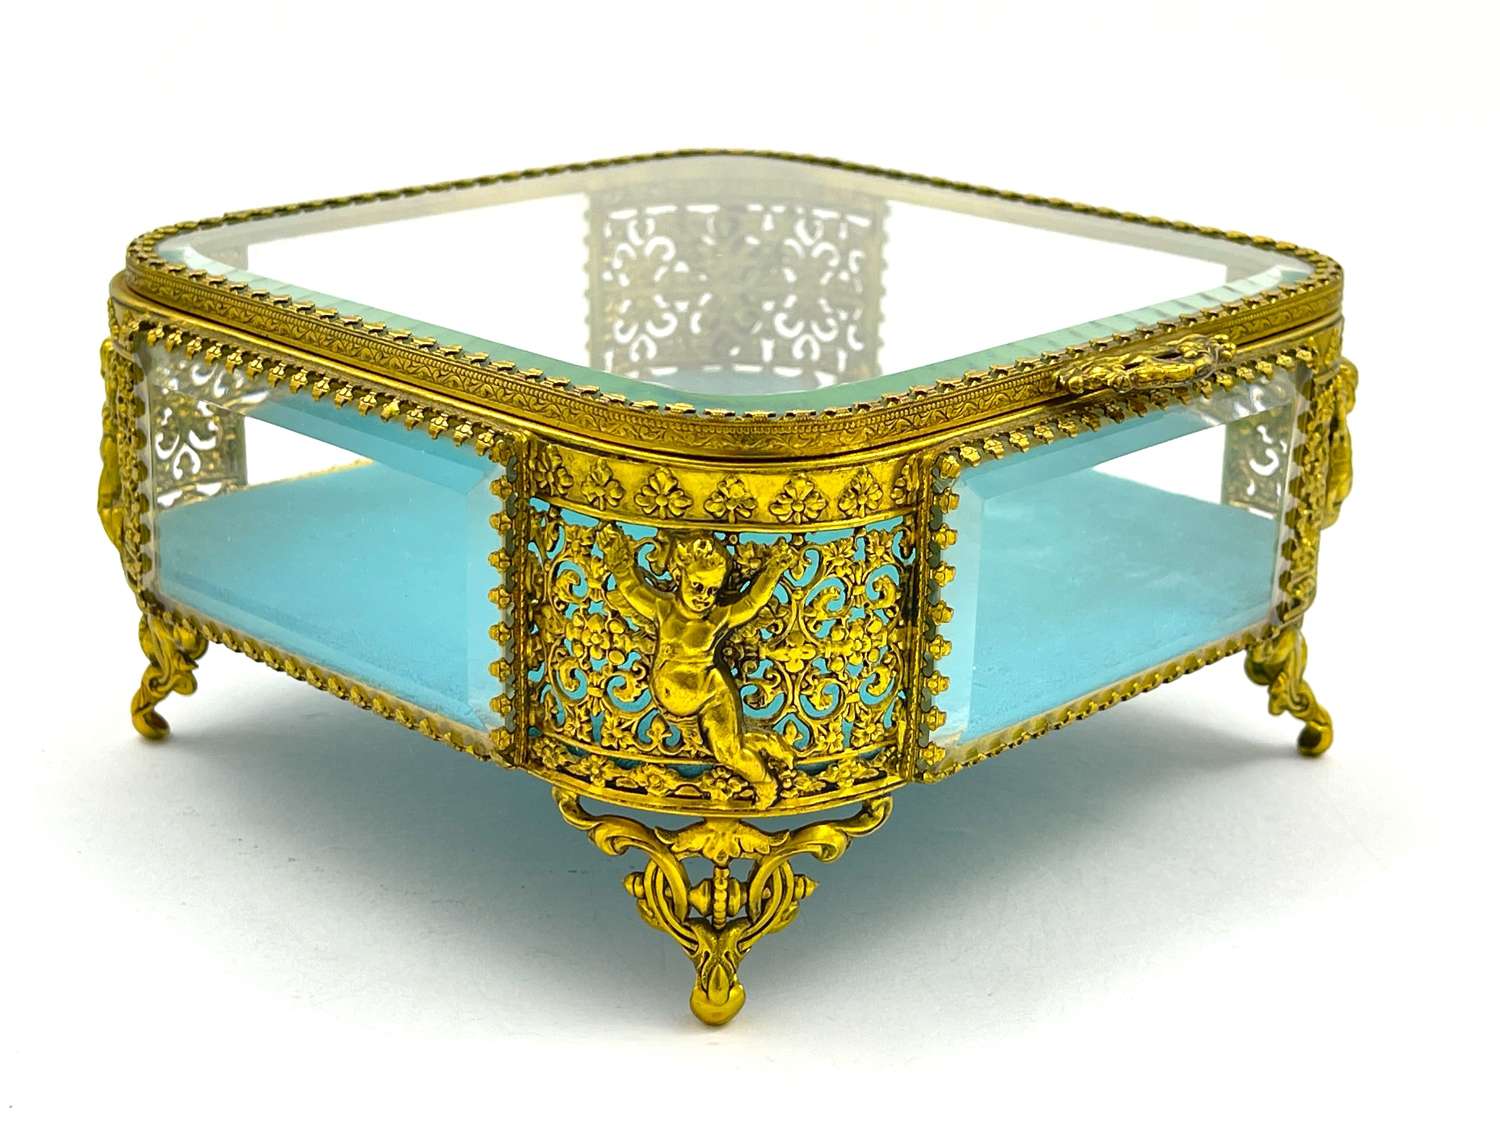 Antique French Crystal and Bronze Jewellery Casket with Cherubs